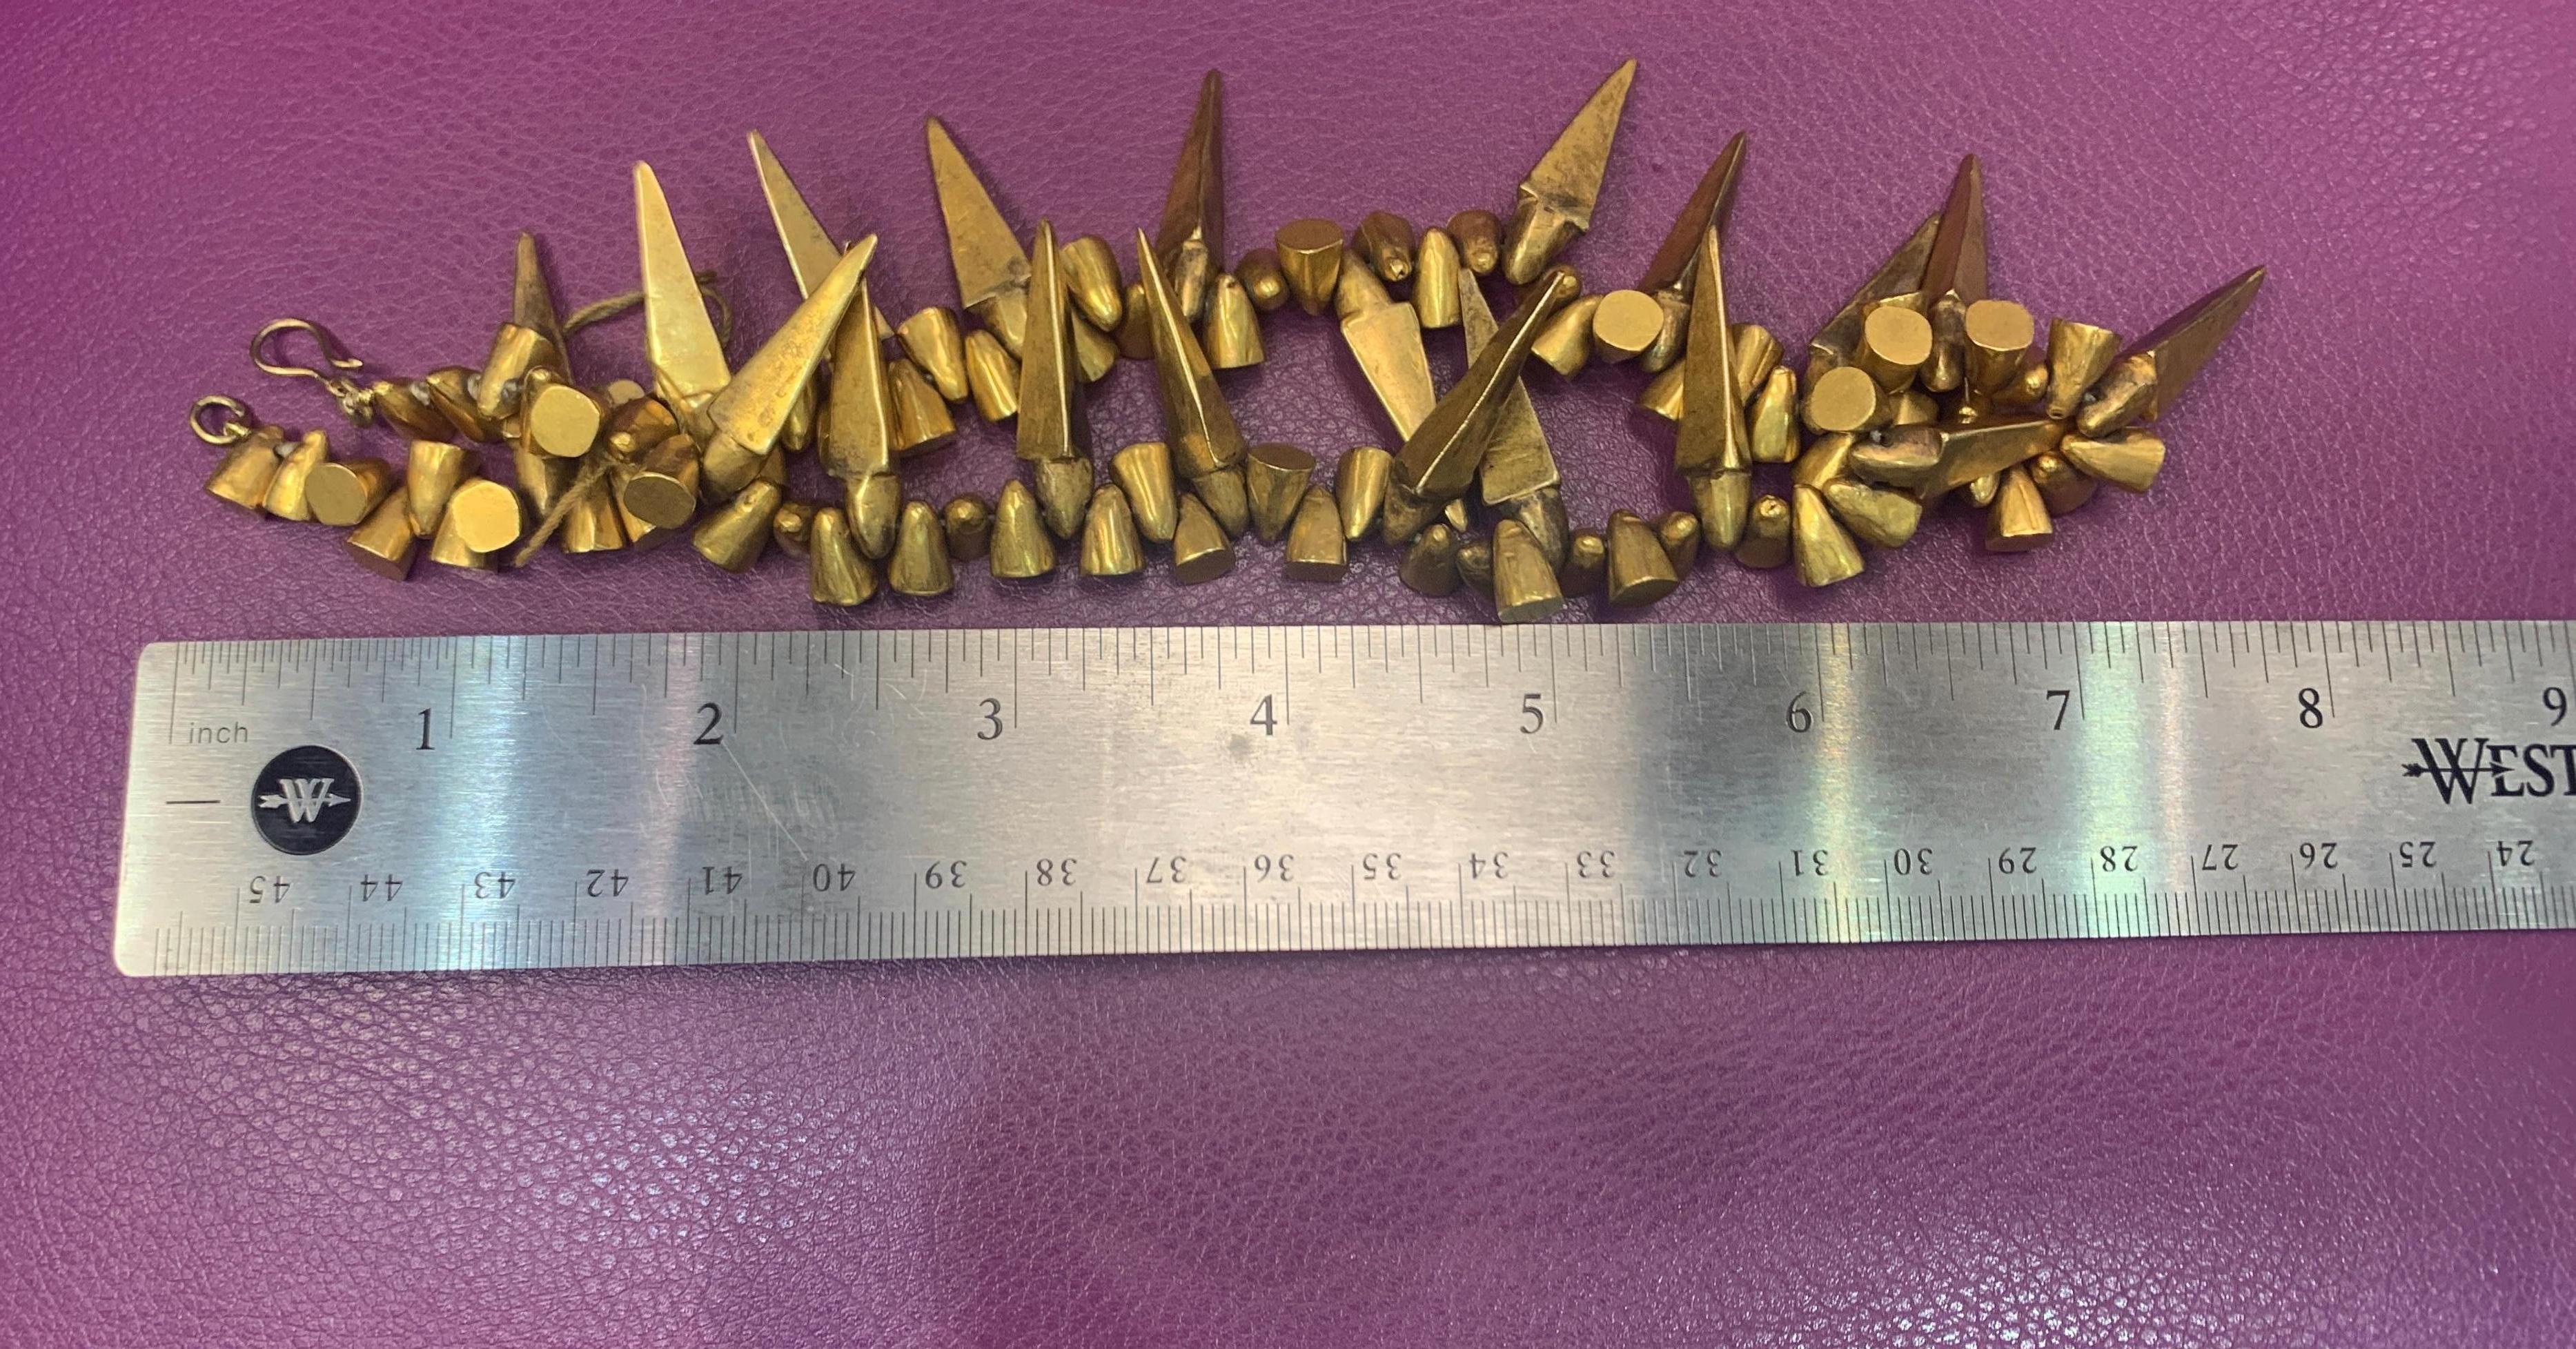 Archeological Revival Spike Necklace In Excellent Condition For Sale In New York, NY